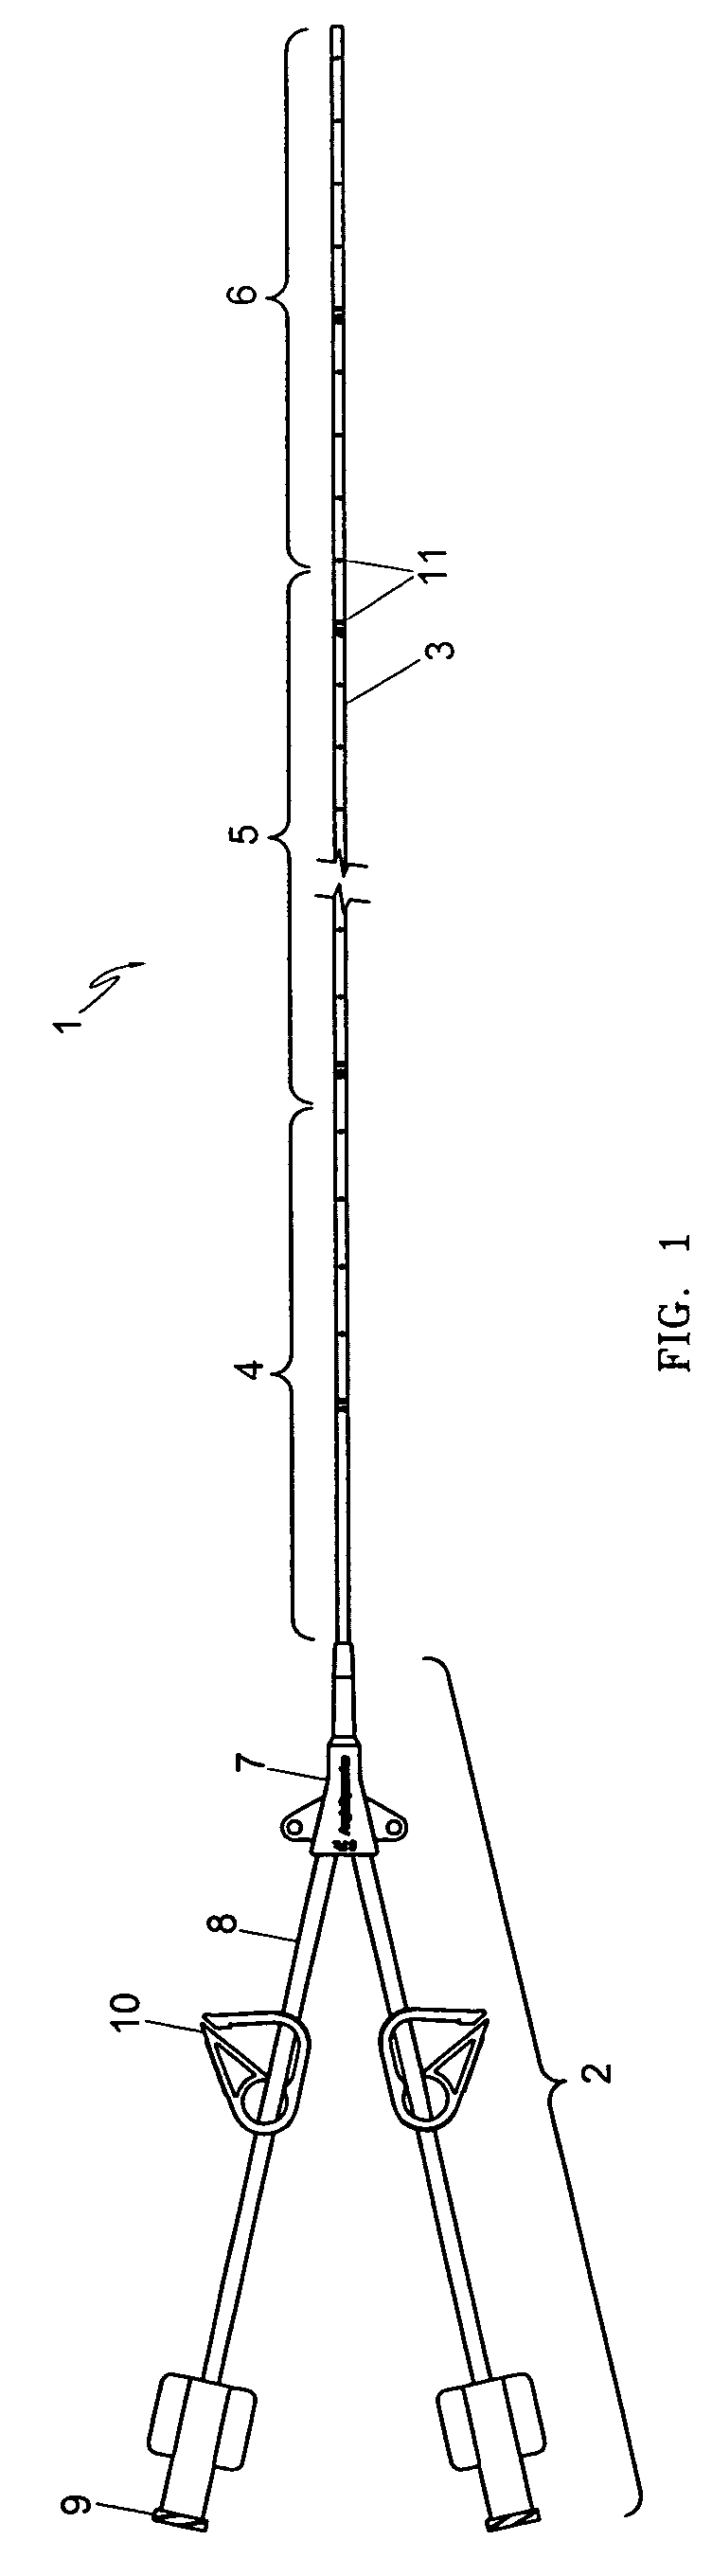 Variable characteristic venous access catheter shaft